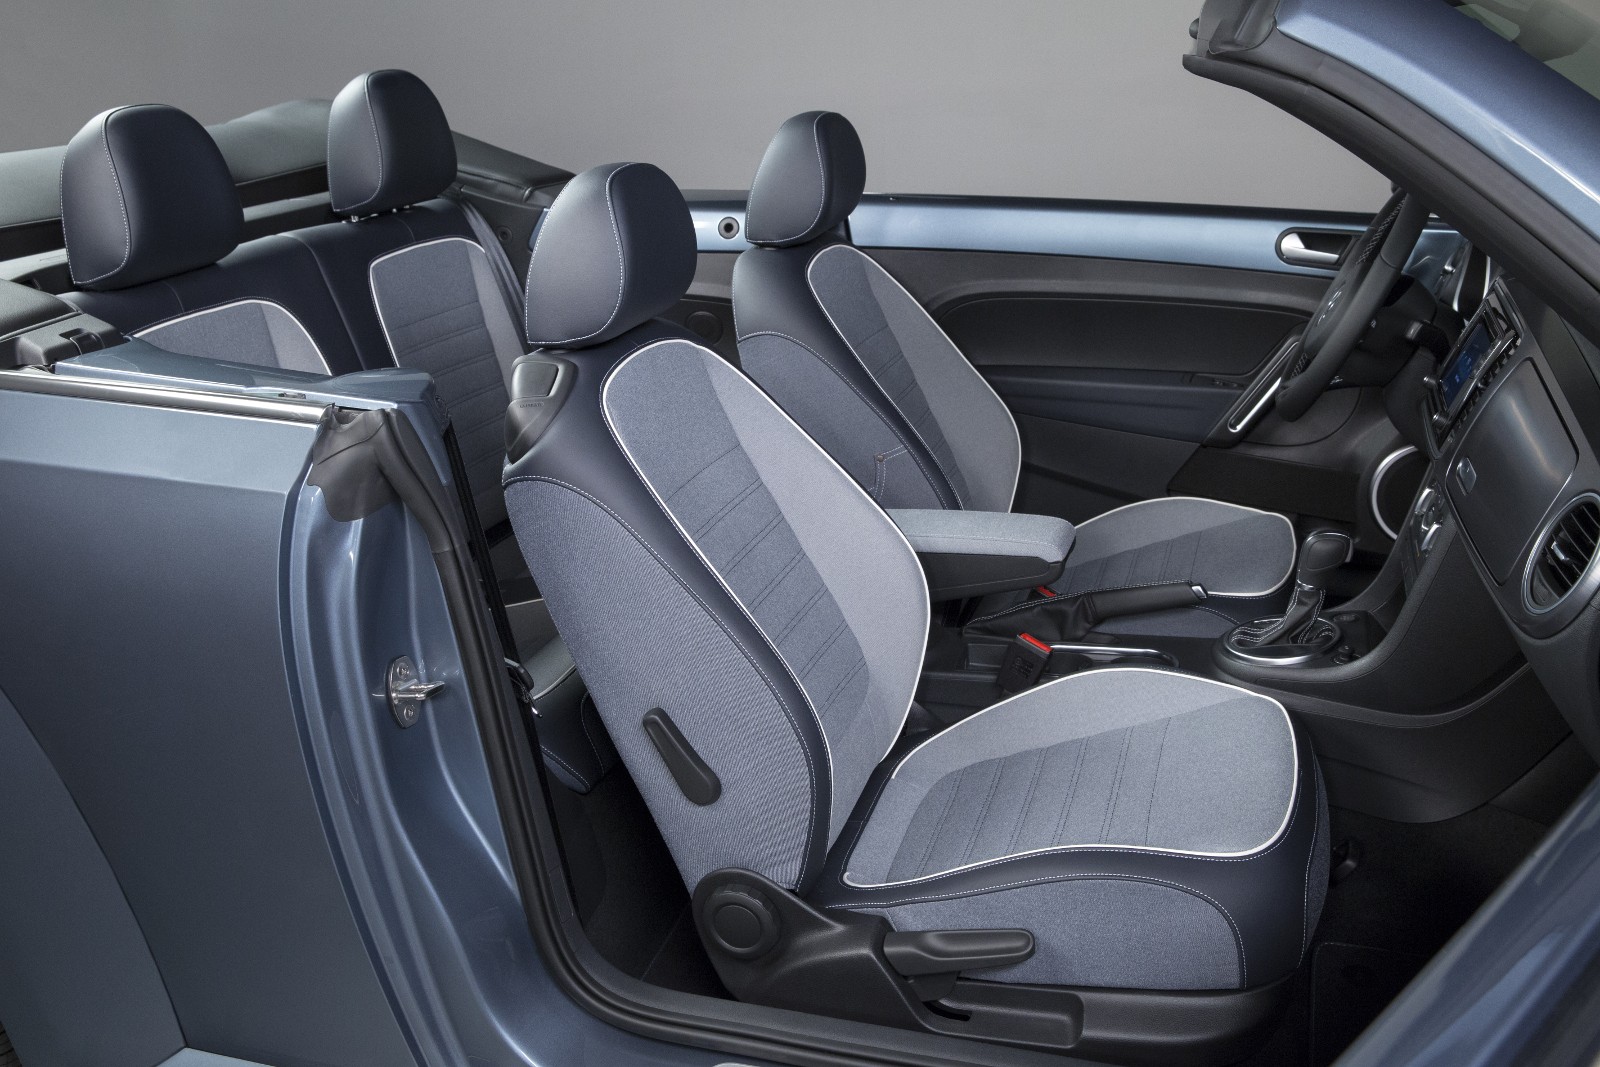 Volkswagen Beetle Denim Unveiled With Jeans Fabric For The Roof And